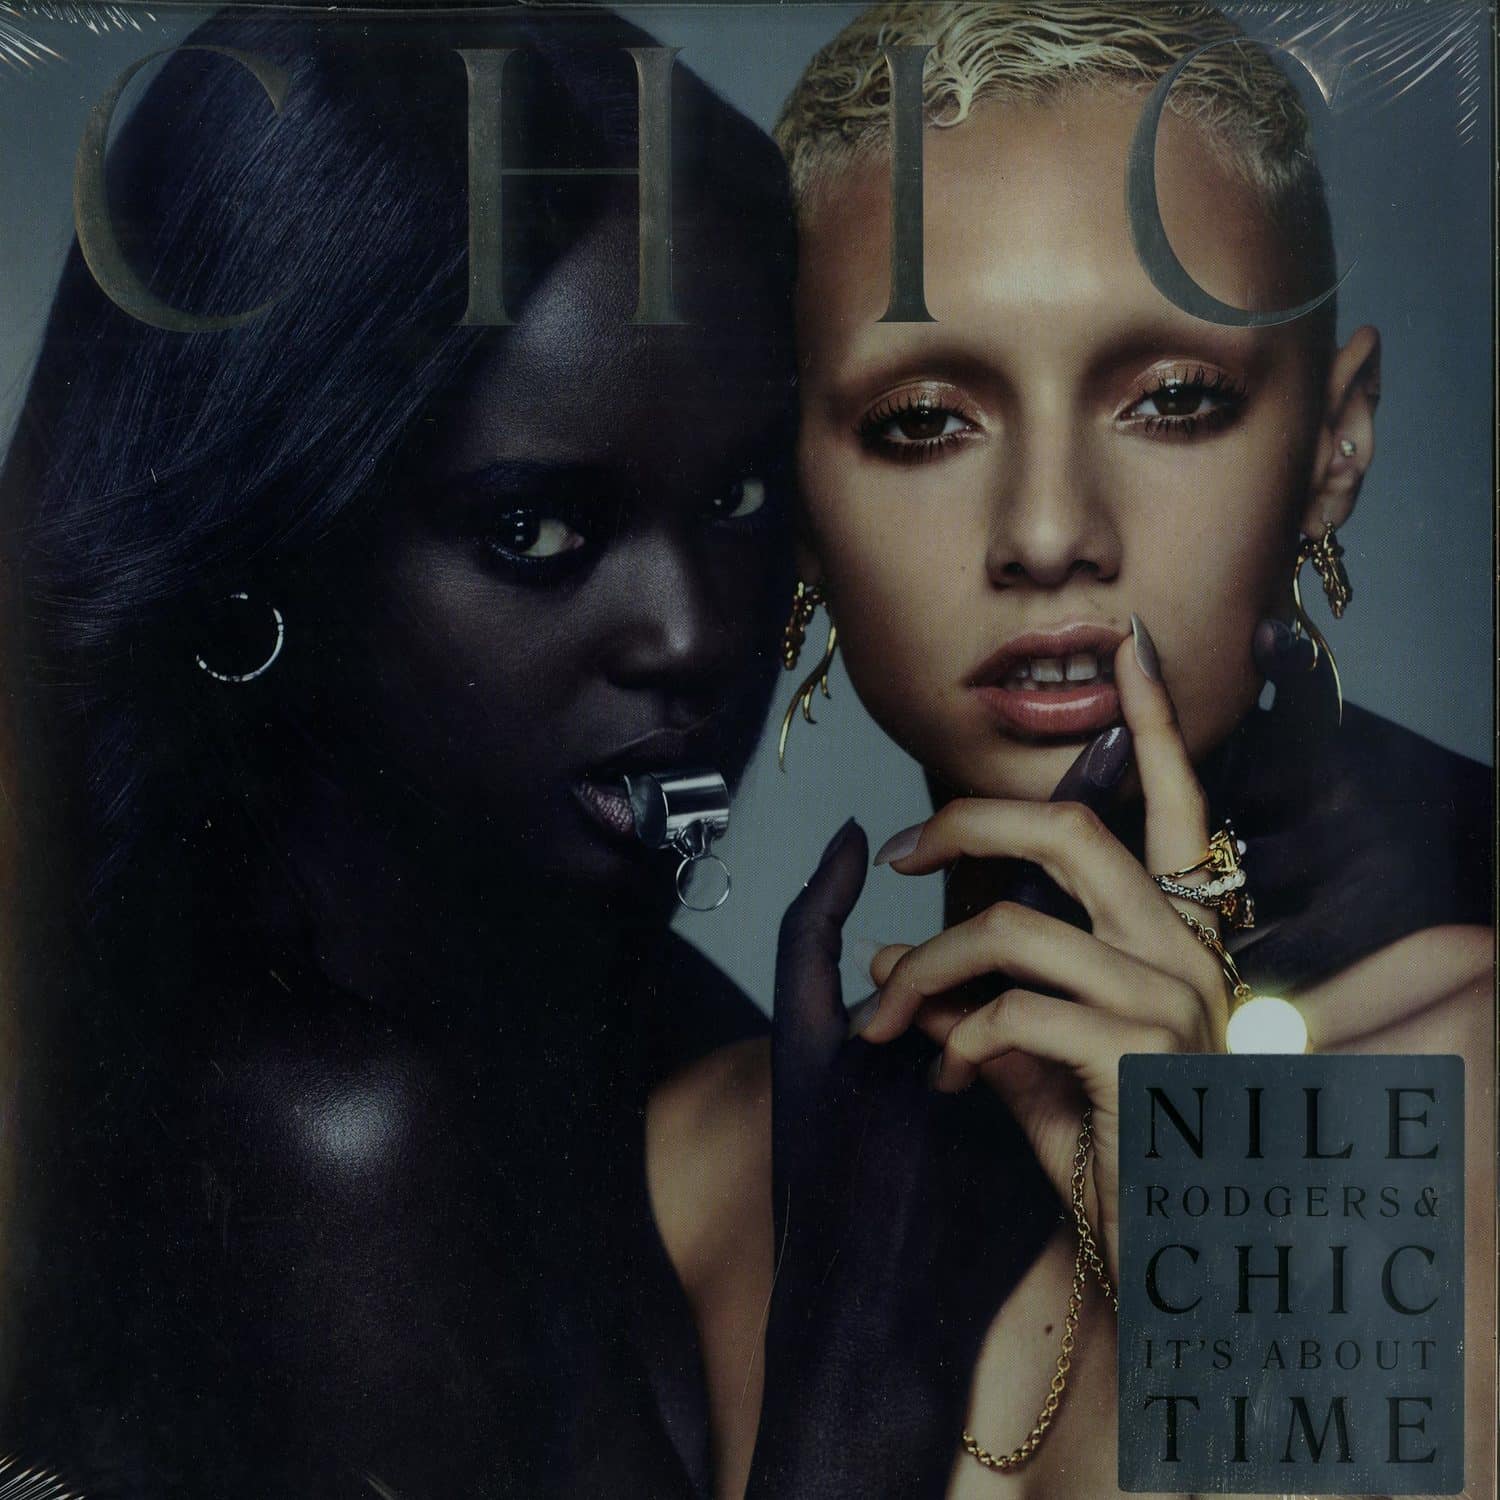 Nile Rodgers & Chic - ITS ABOUT TIME 